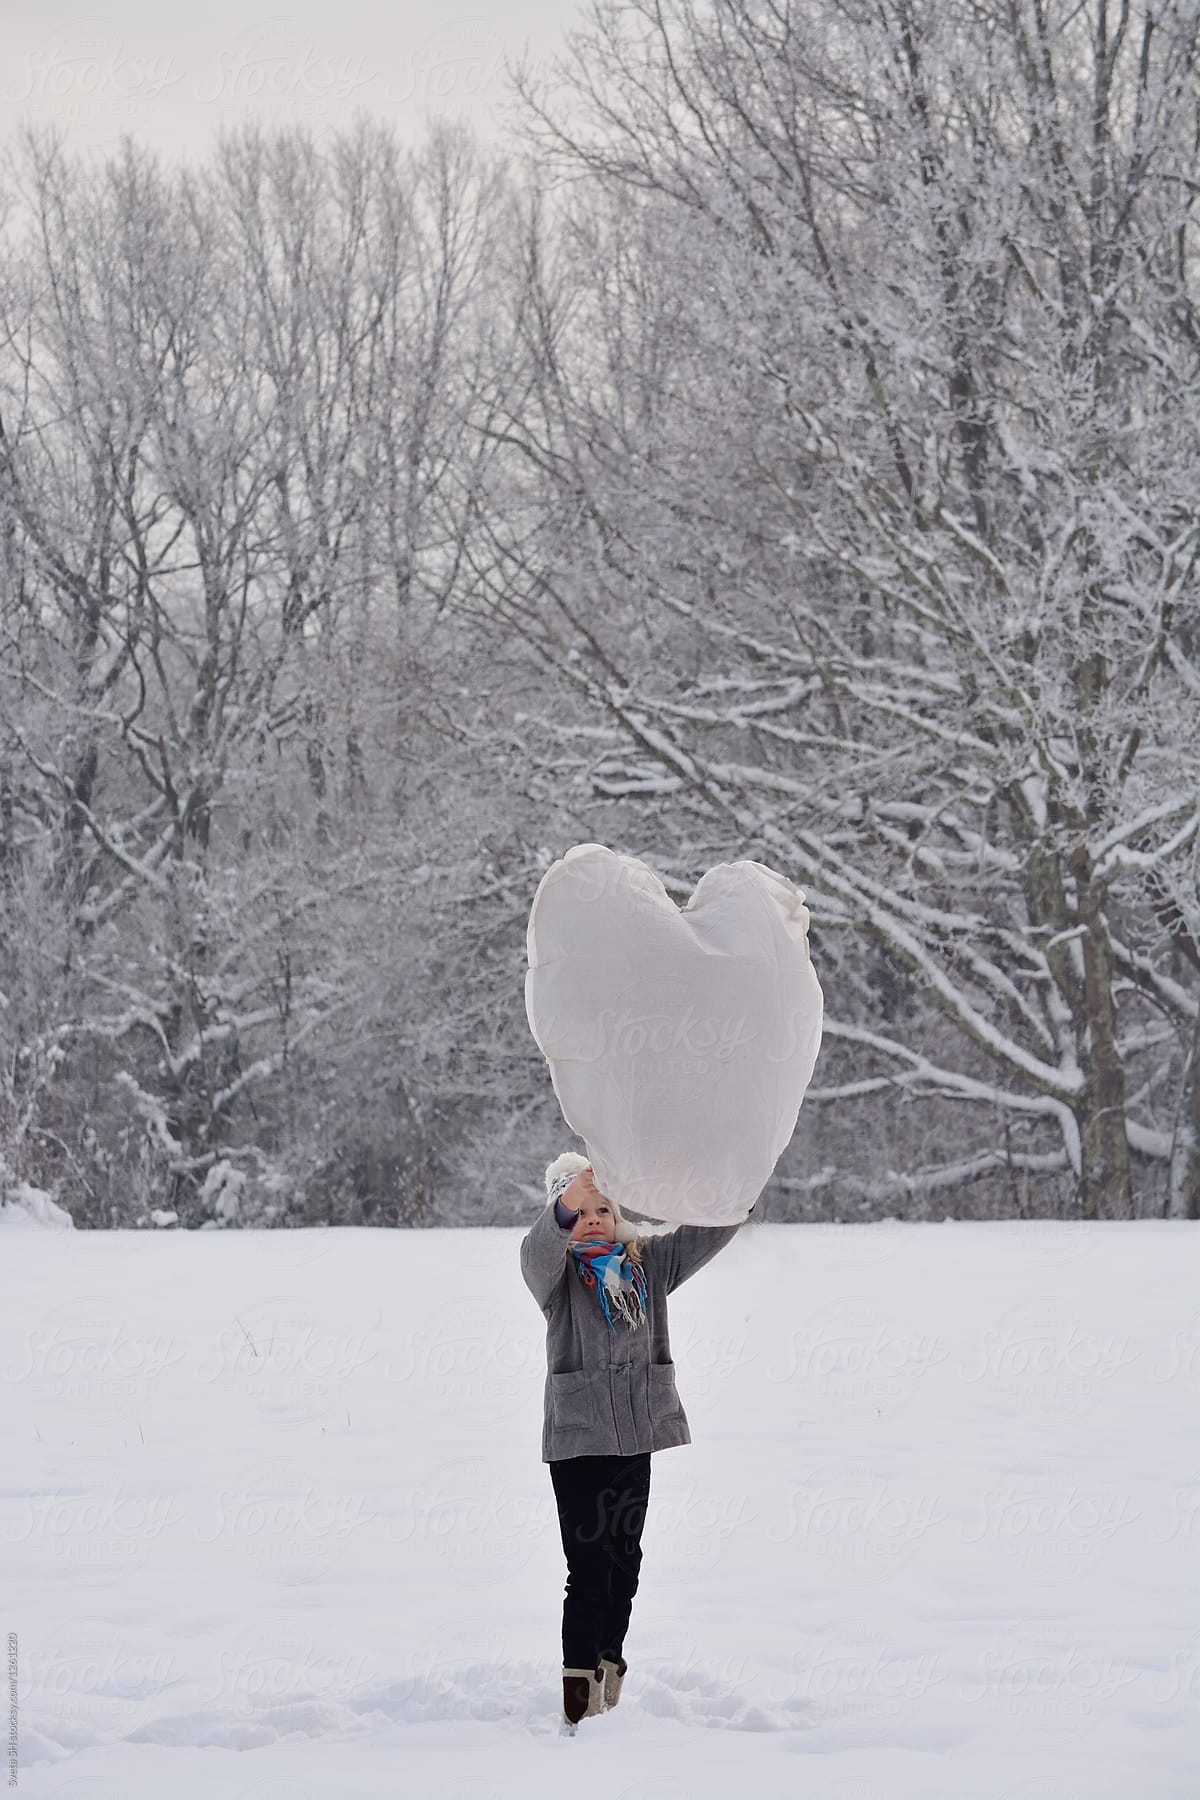 The little girl and a paper balloon